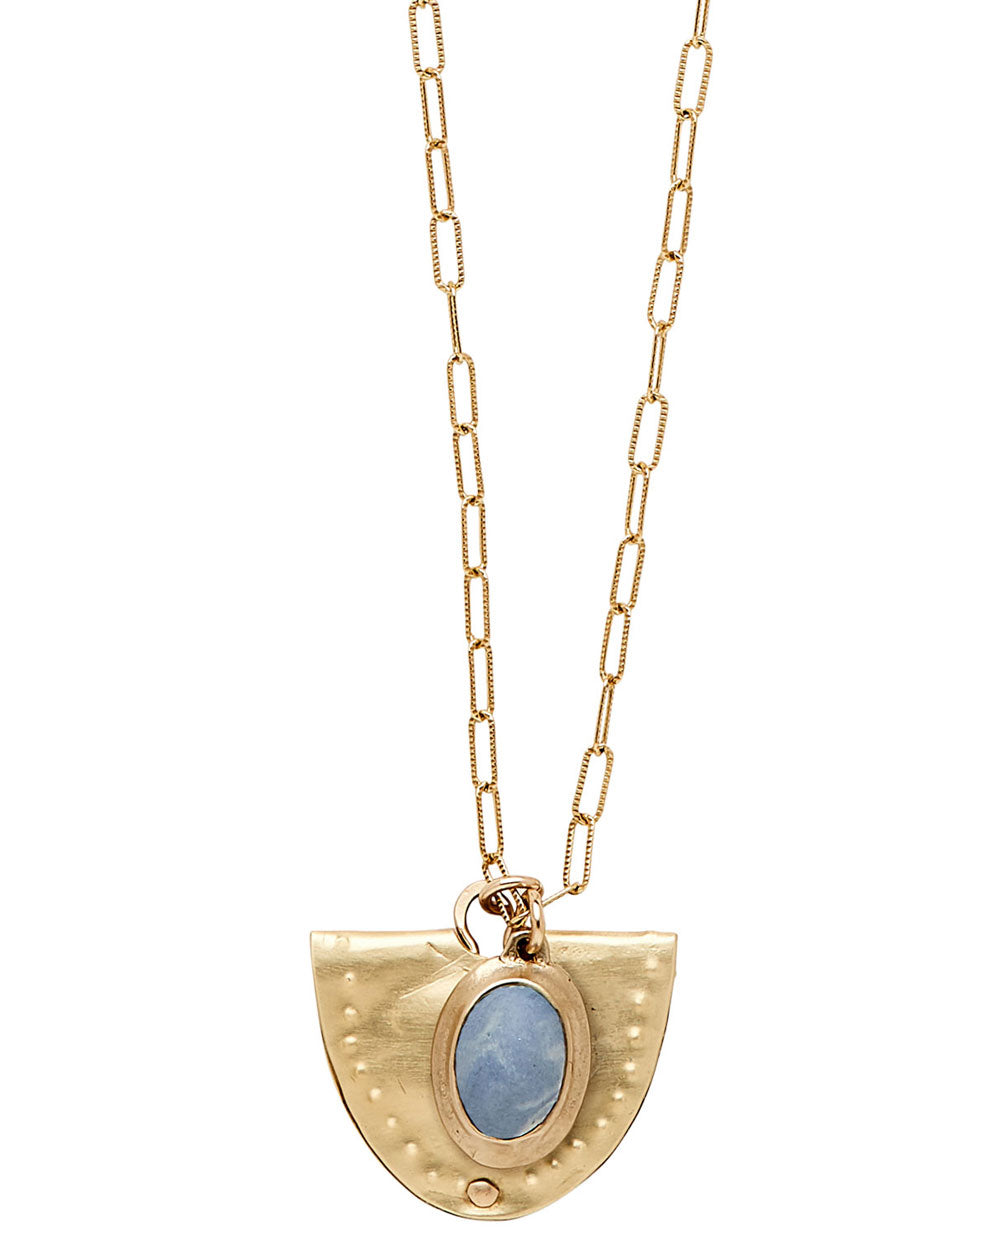 Mevia Bronze Pendant with Clay Charm Necklace